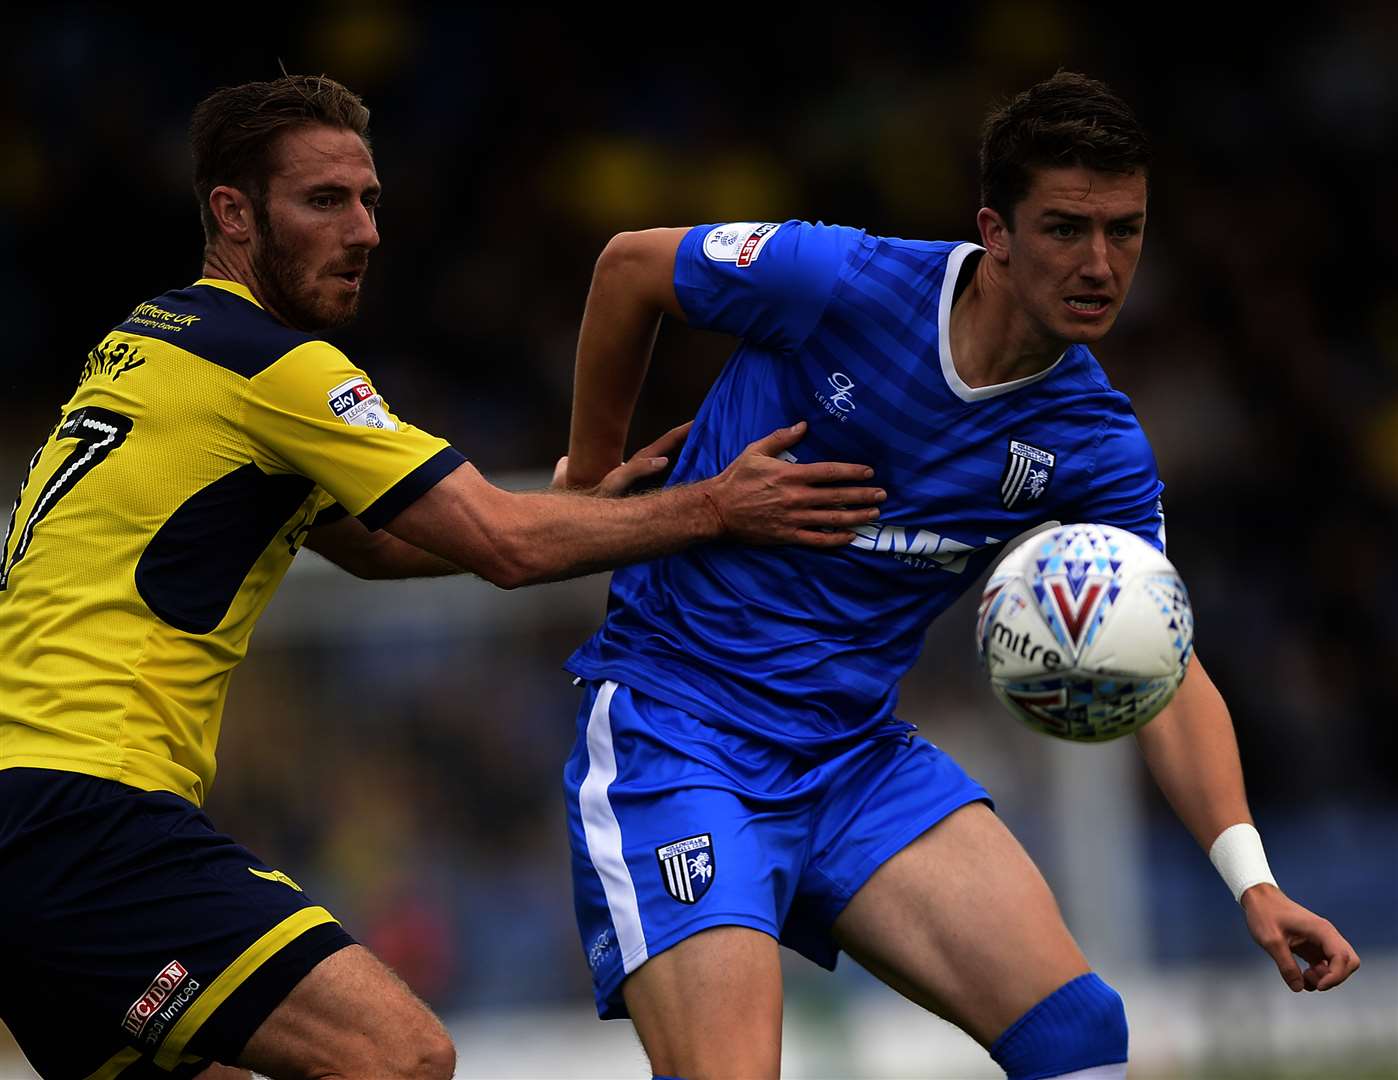 Gillingham’s Alex Lacey in action Picture: Ady Kerry